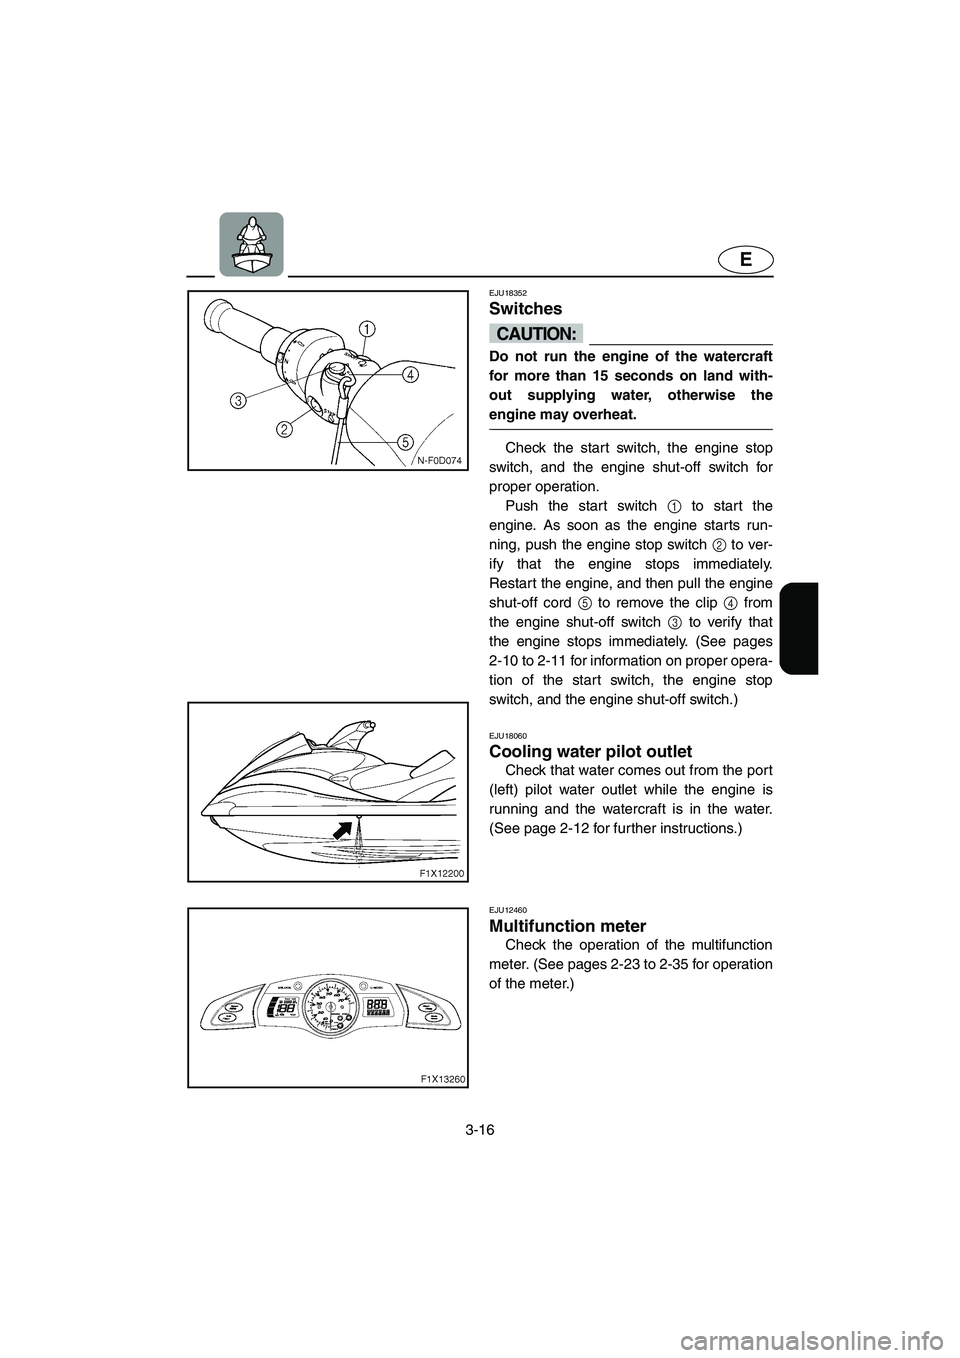 YAMAHA FX HO 2006  Owners Manual 3-16
E
EJU18352 
Switches 
CAUTION:@ Do not run the engine of the watercraft
for more than 15 seconds on land with-
out supplying water, otherwise the
engine may overheat. 
@
Check the start switch, t